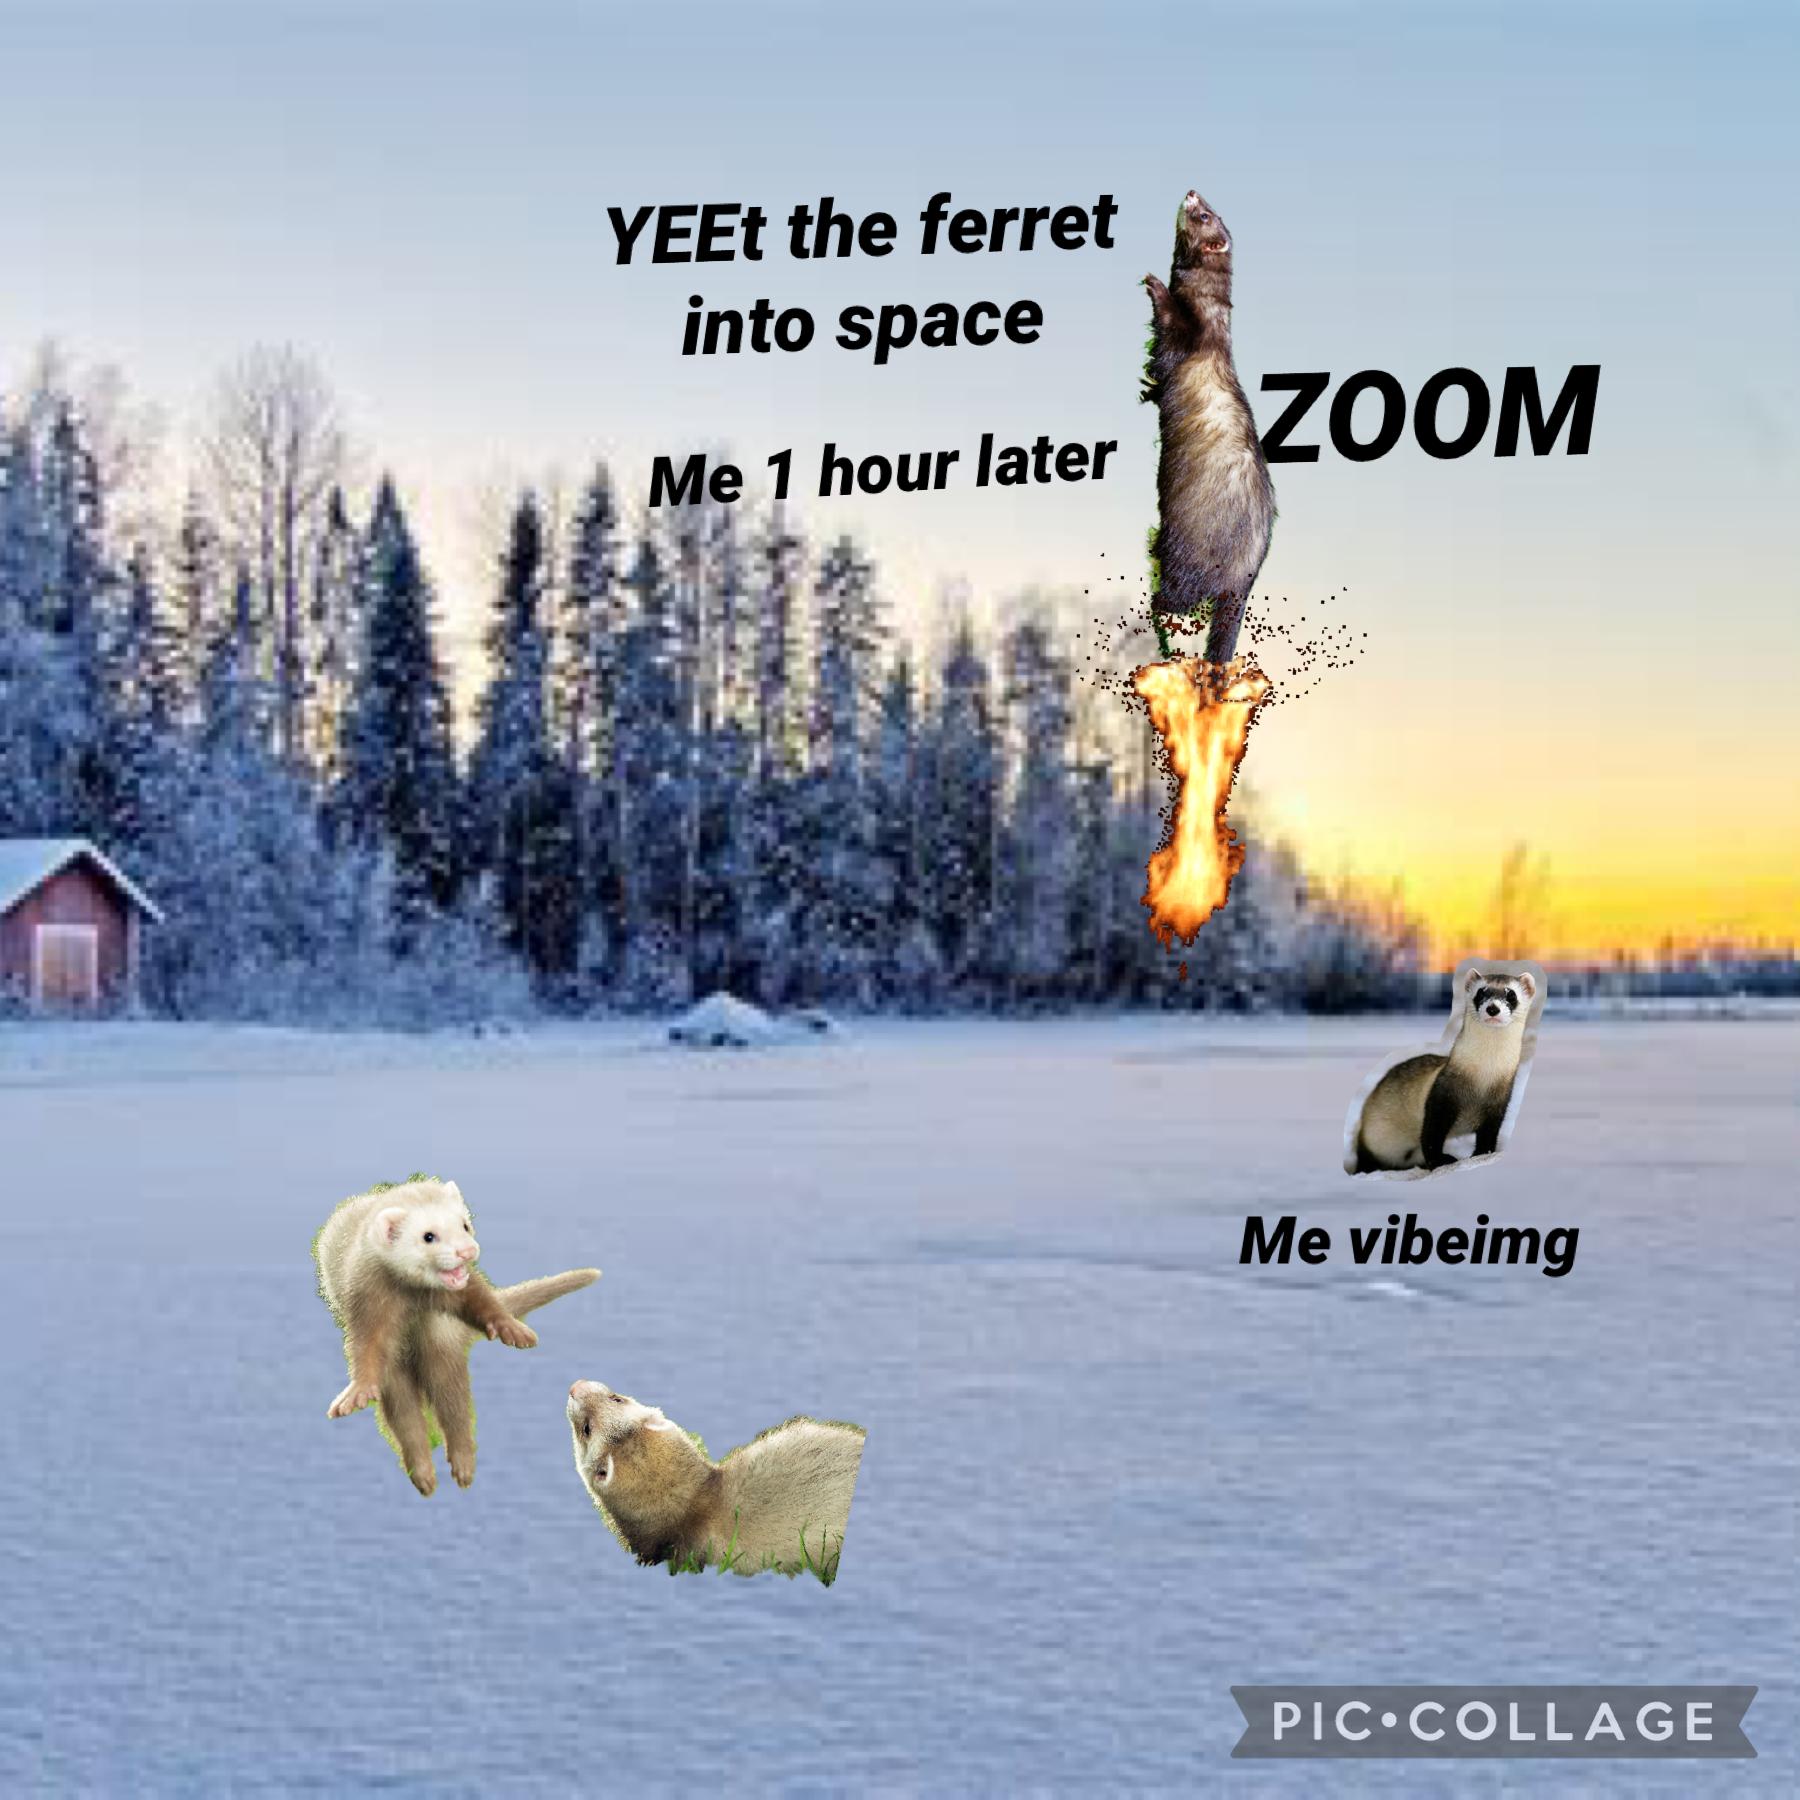 Zoom goes the ferret